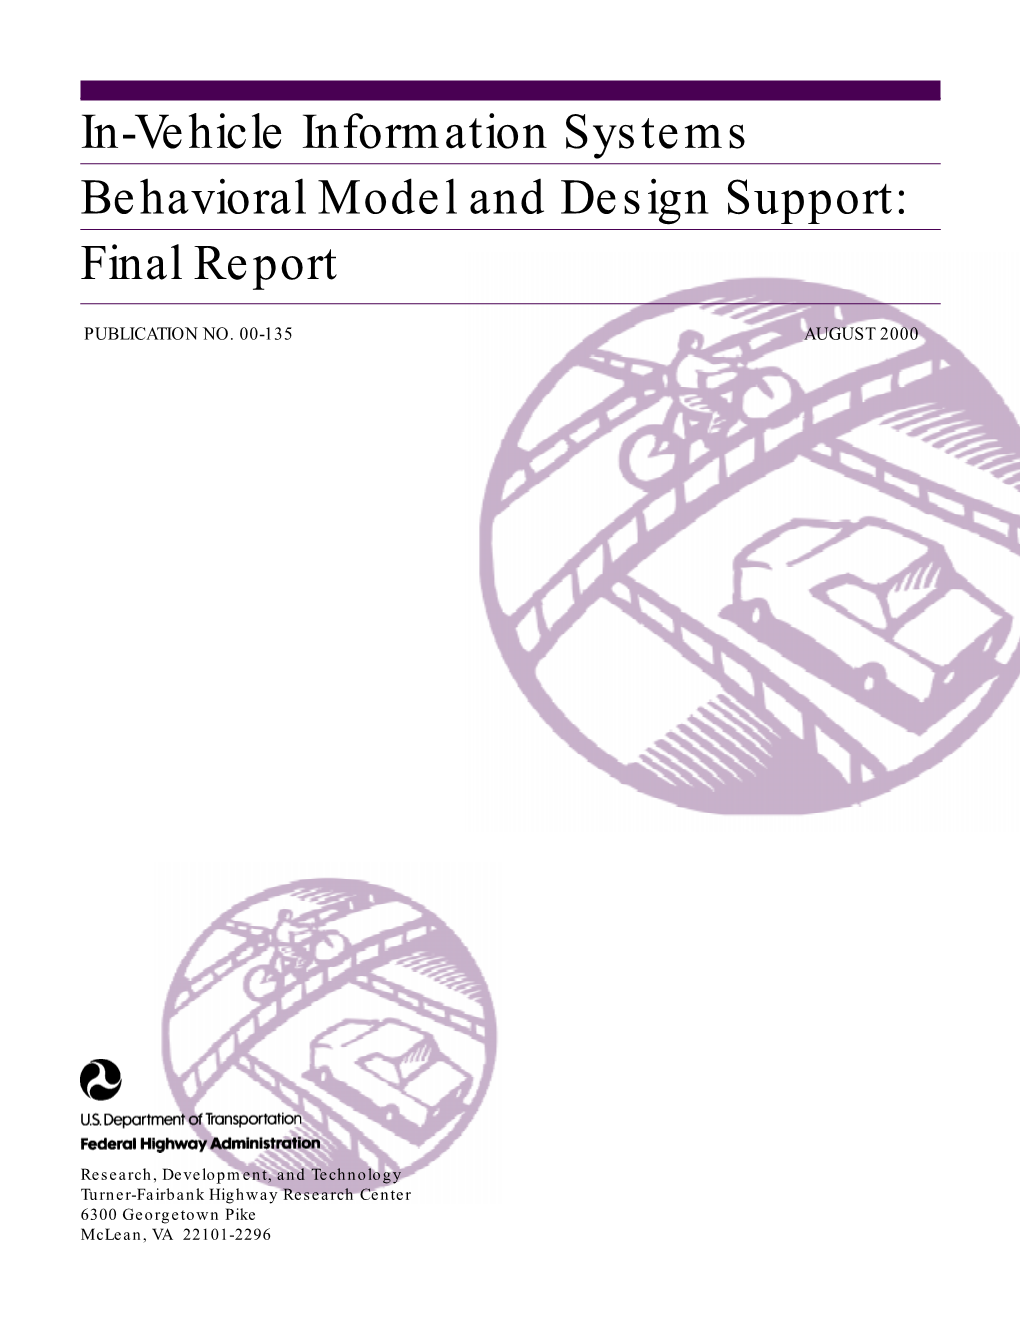 In-Vehicle Information Systems Behavioral Model and Design Support: Final Report